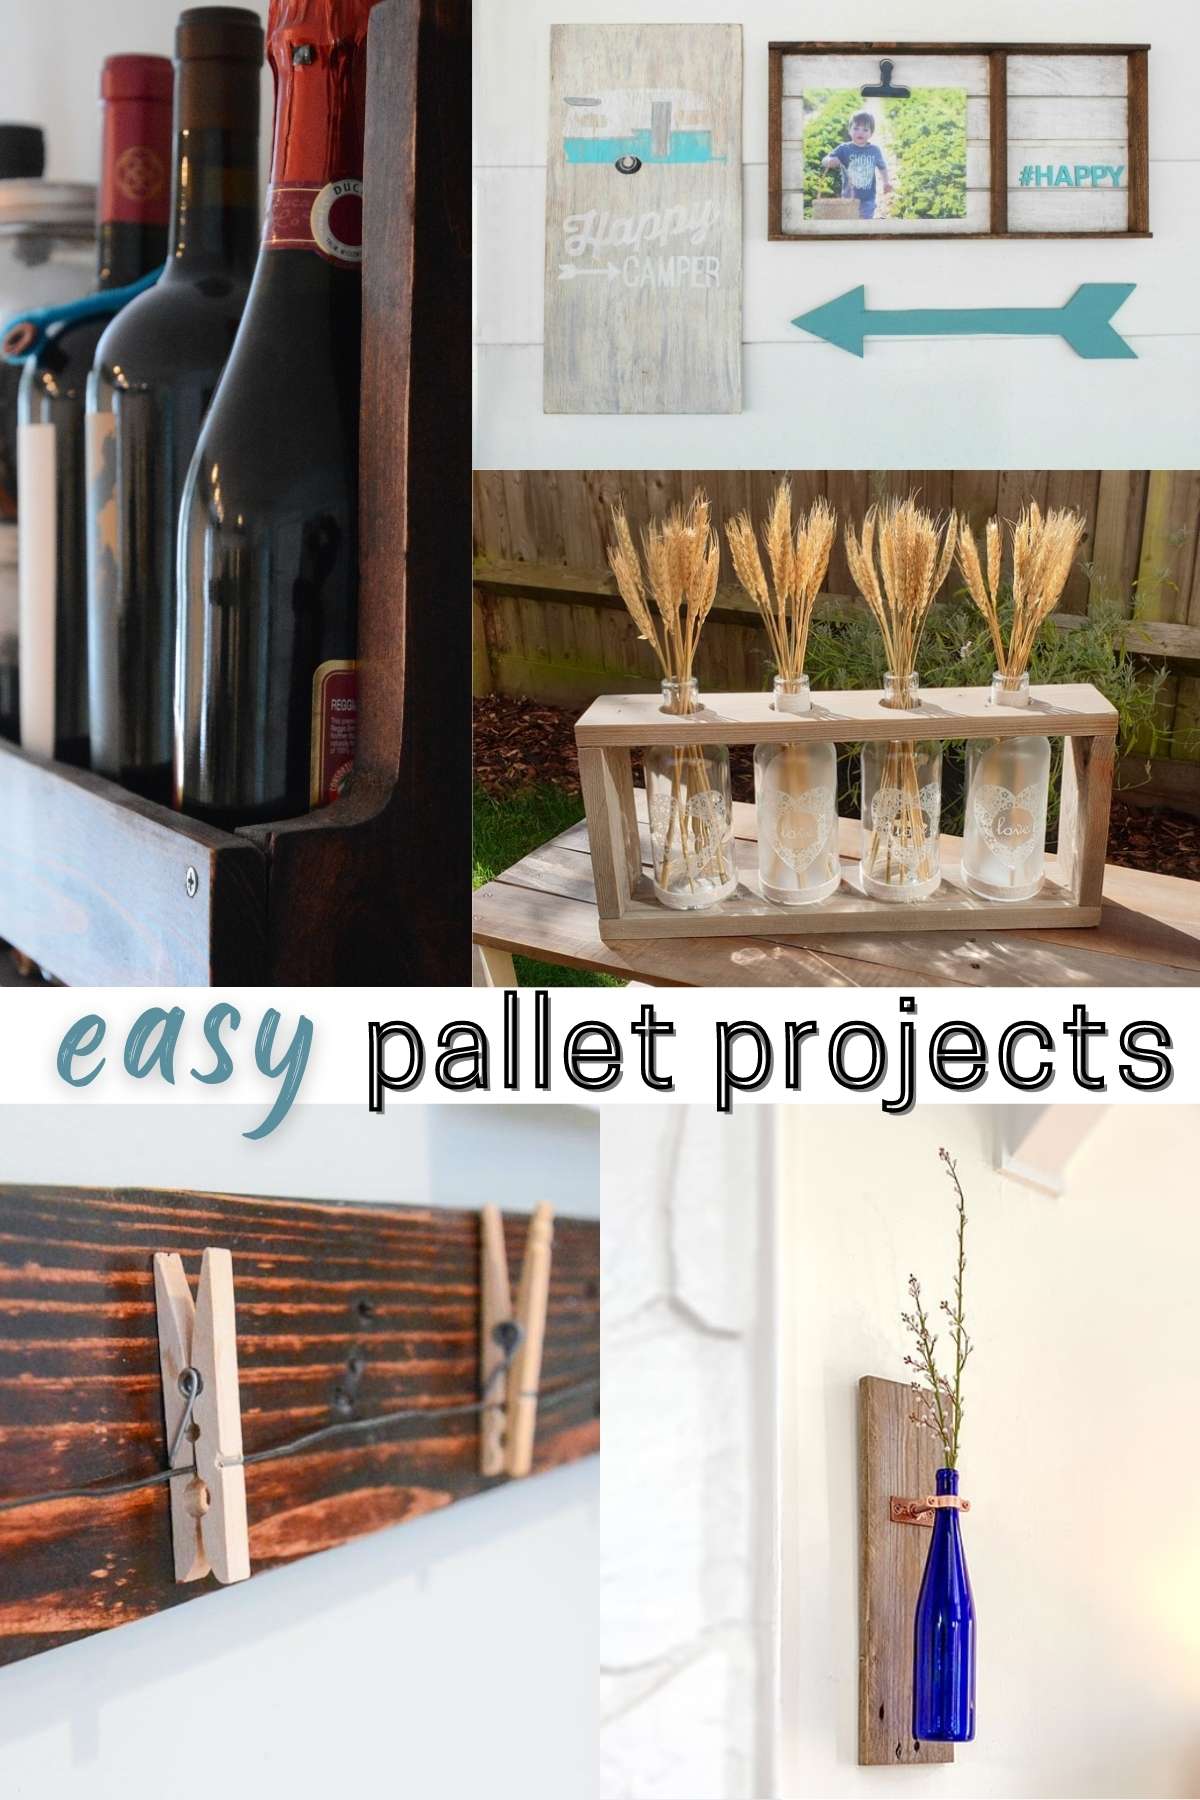 easy pallet projects with 5 different images of pallet wood DIY projects.